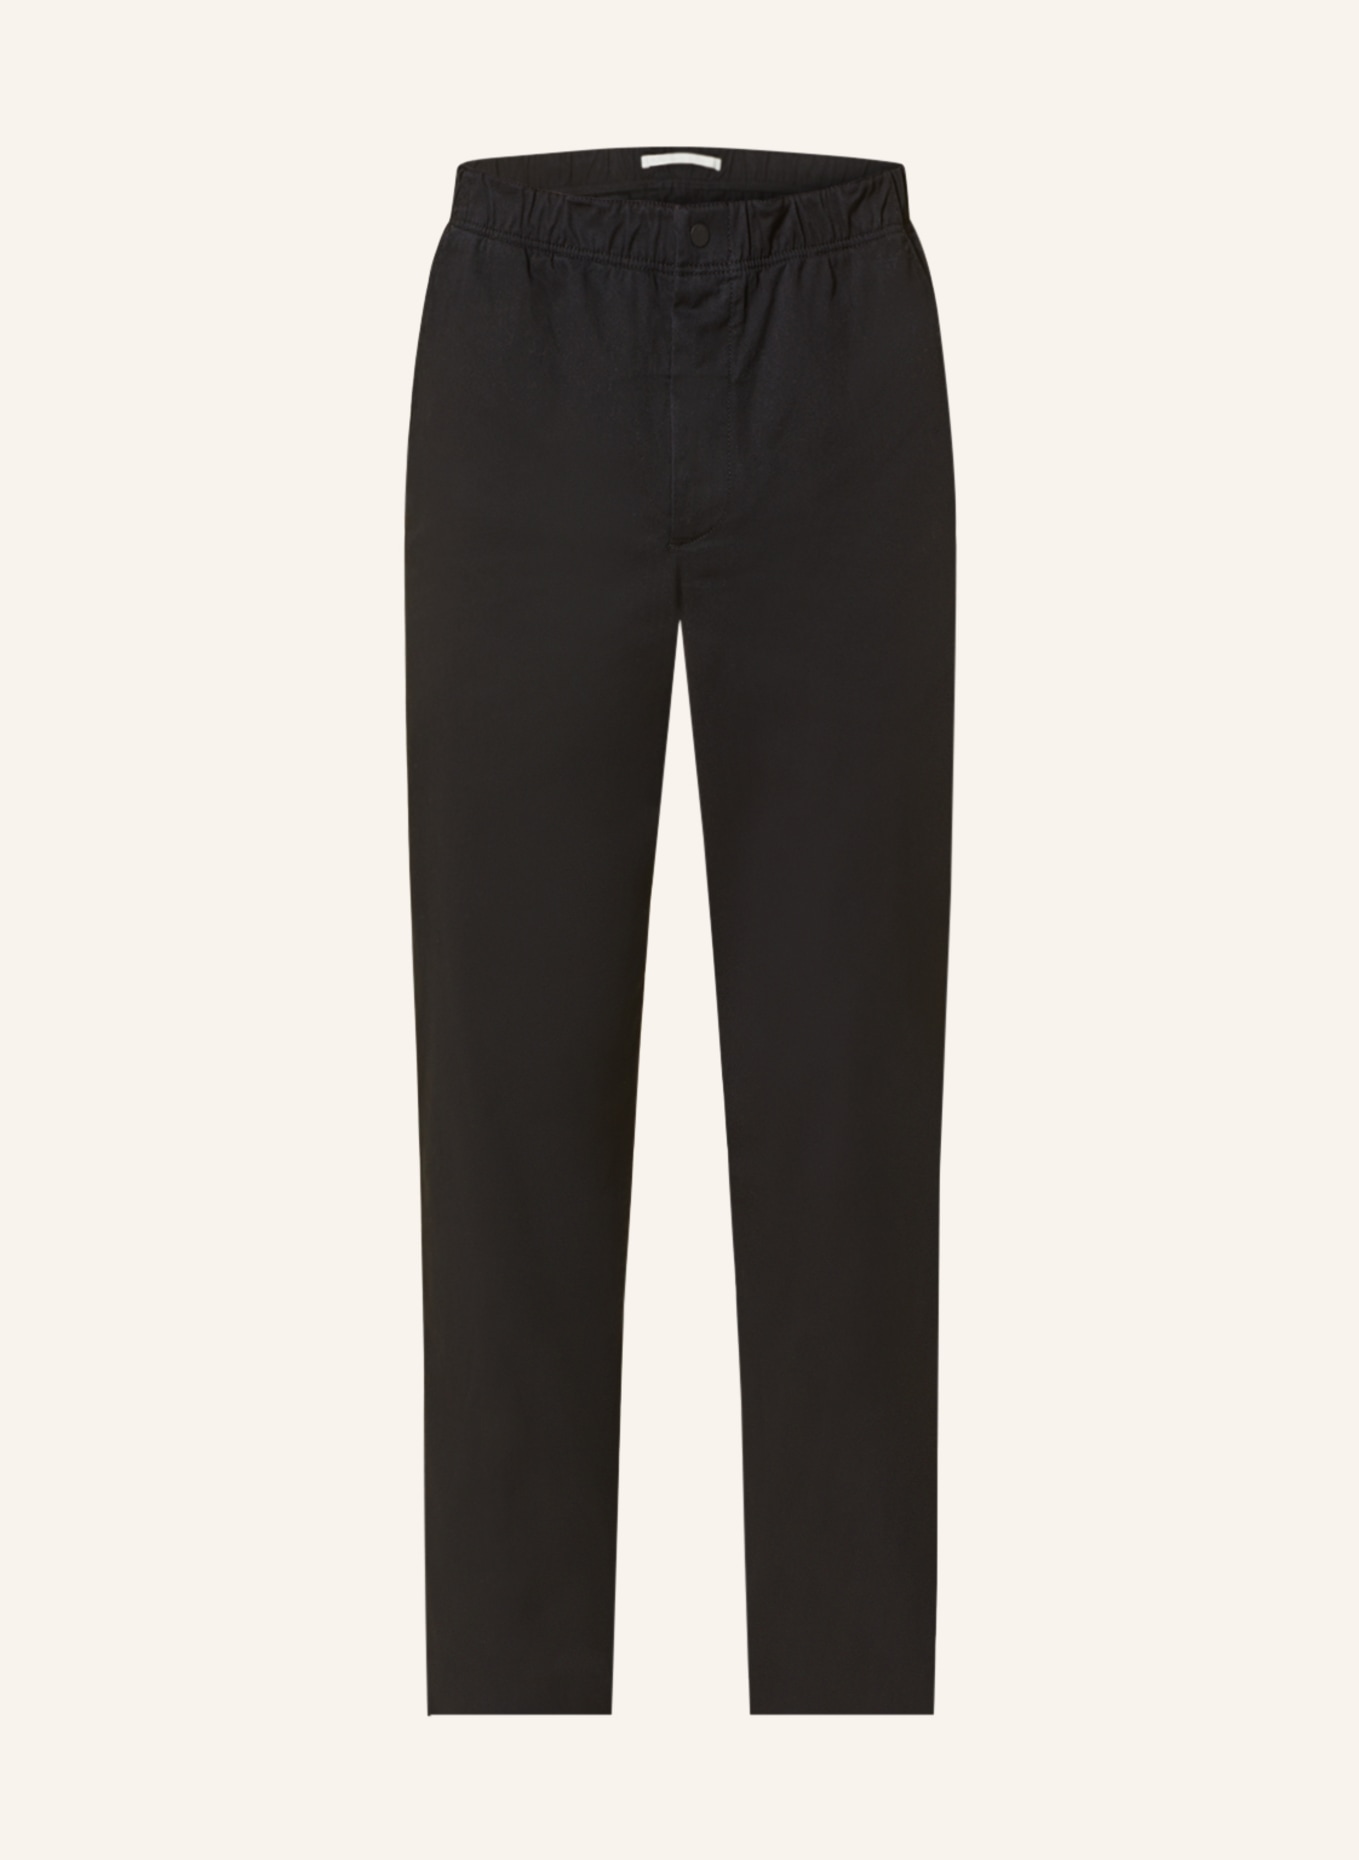 NORSE PROJECTS Hose EZRA Relaxed Fit, Farbe: SCHWARZ (Bild 1)